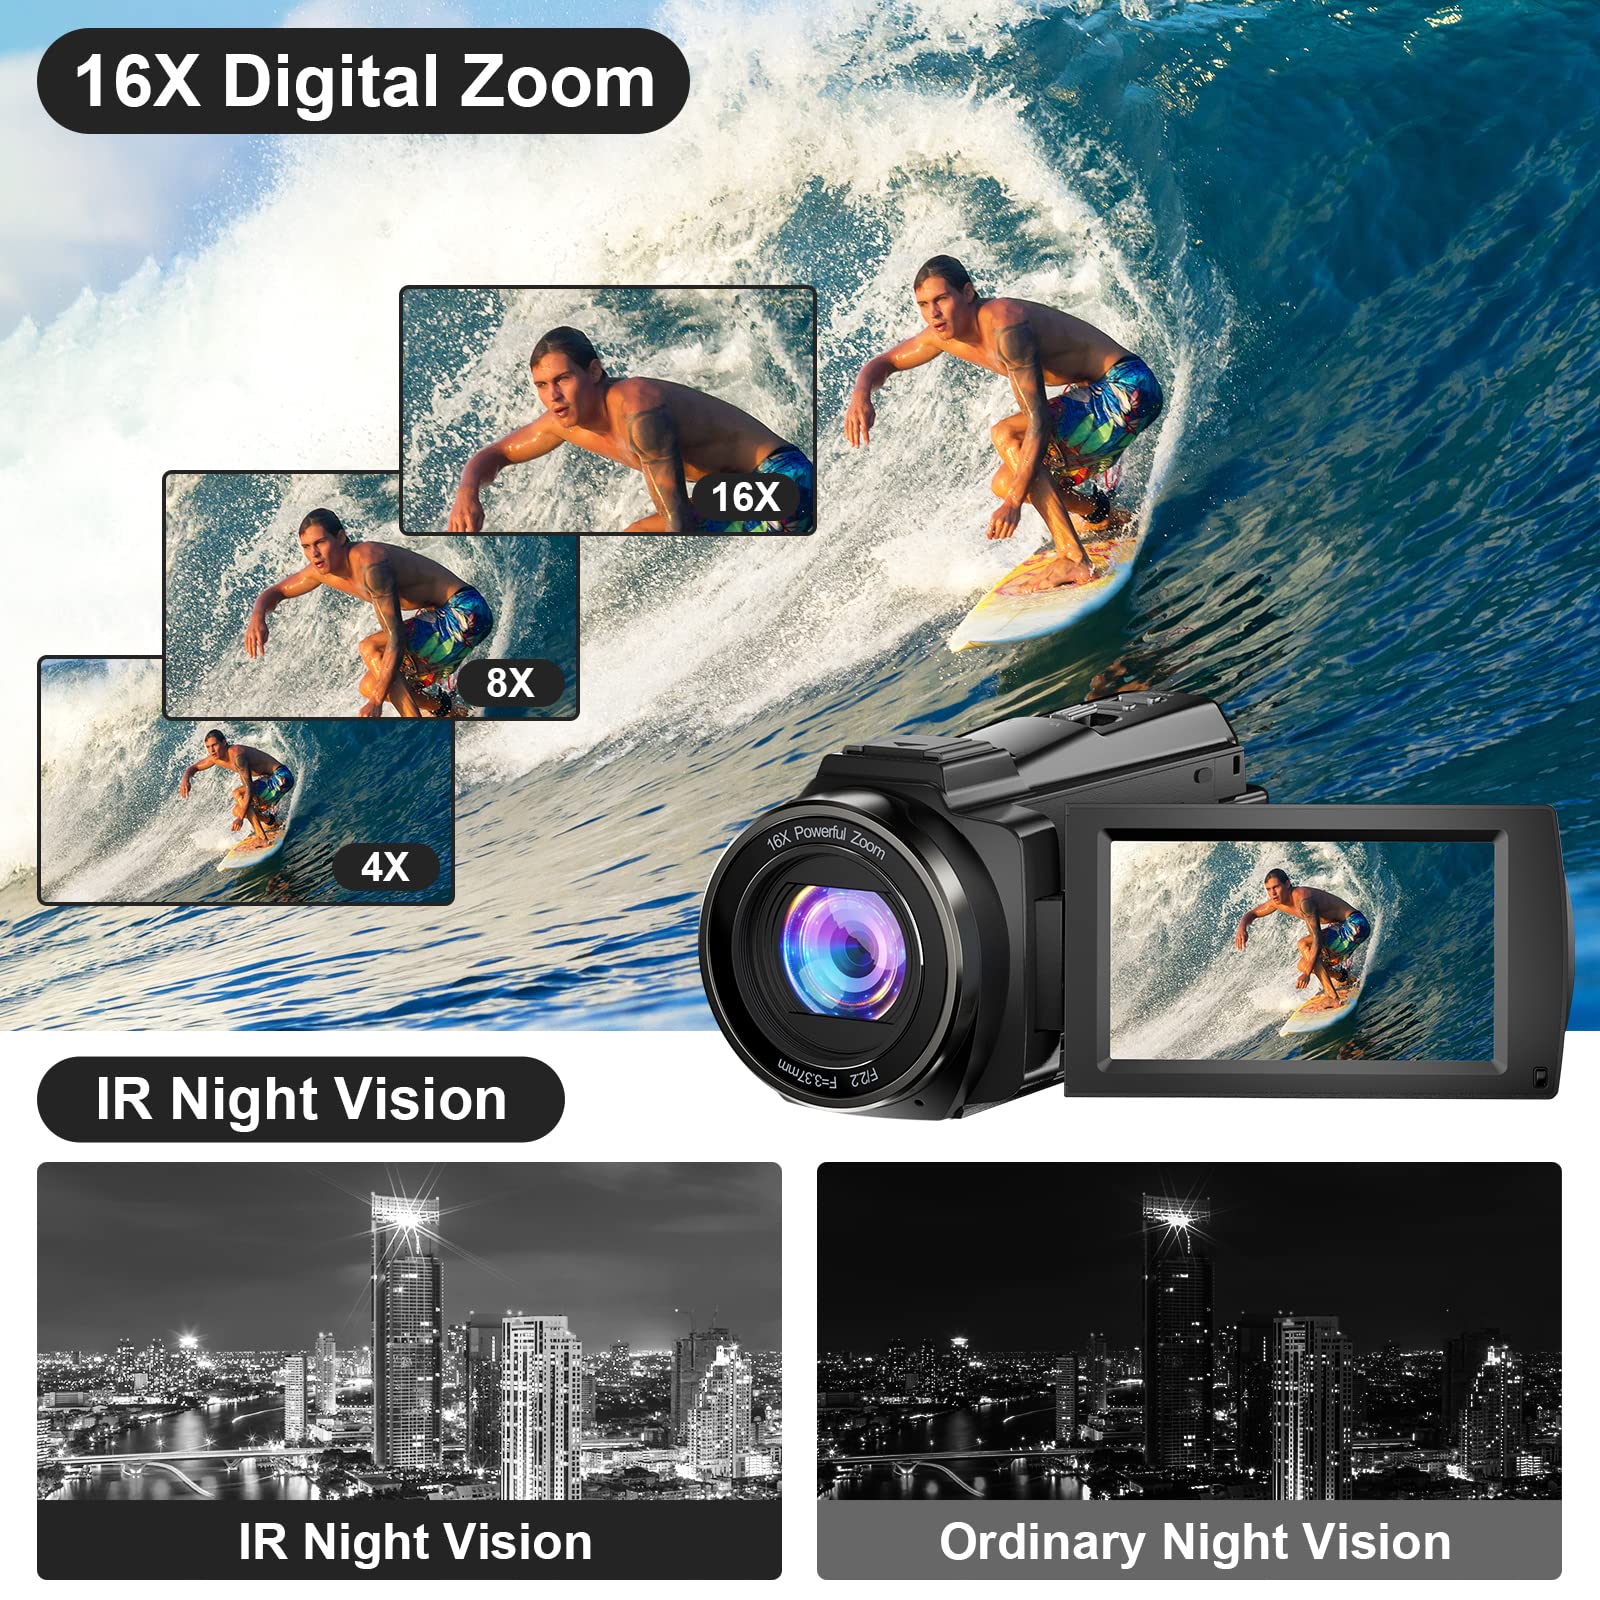 5K Video Camera Camcorder, 48MP UHD Wifi IR Night Vision Vlogging Camera for YouTube, 16X Digital Zoom Touch Screen Vlog Camera with External Microphone, Lens Hood, Stabilizer, Remote, 2 Batteries